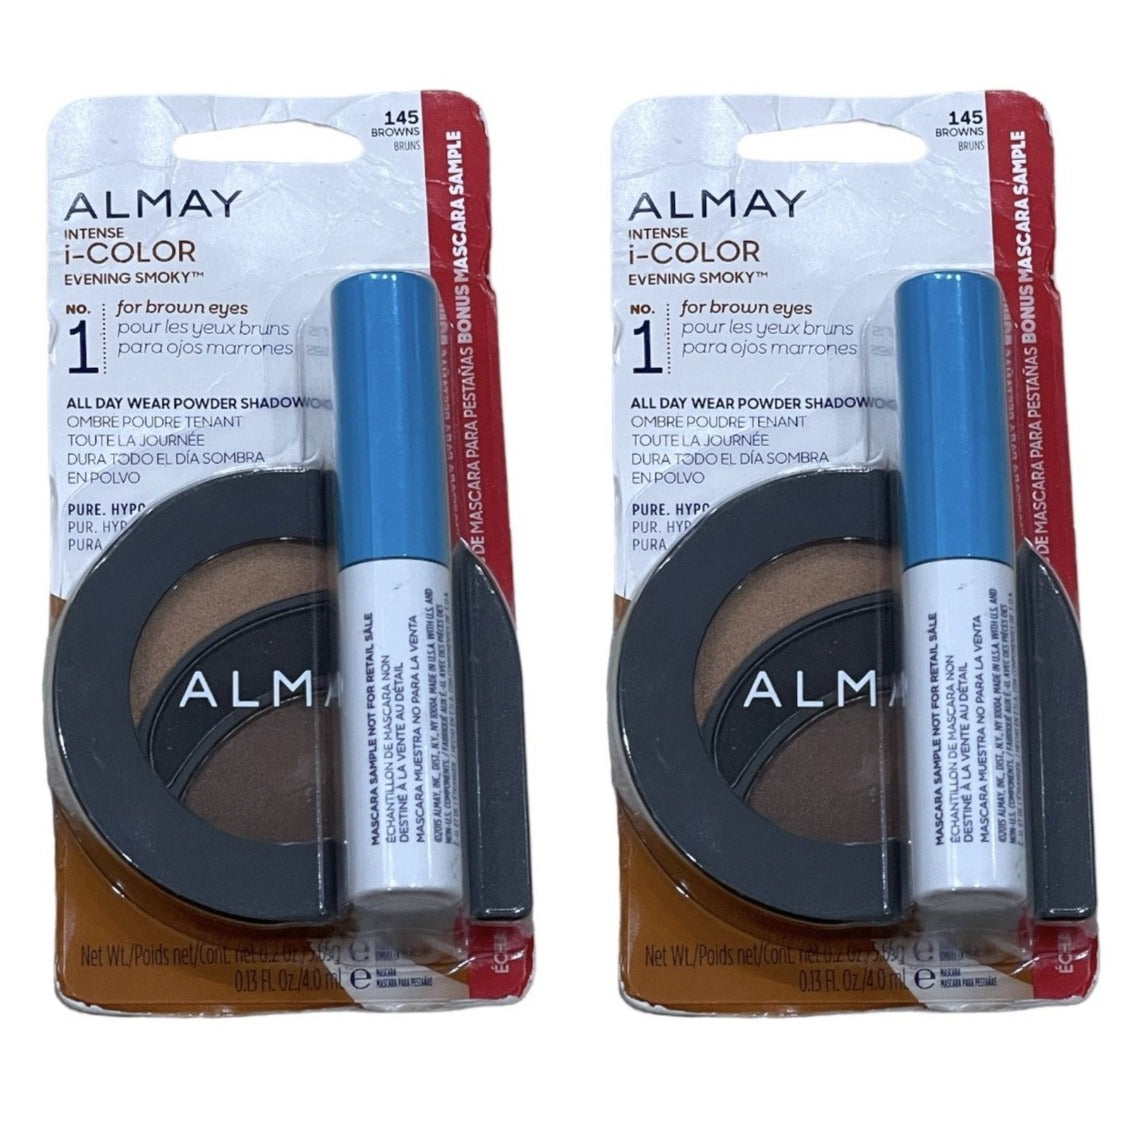 Almay Intense I-Color All Day Wear Powder Shadow, 145 Browns, Shelf Pull Makeup - 32 Units cosmetics liquidations overstock surplus wholesale